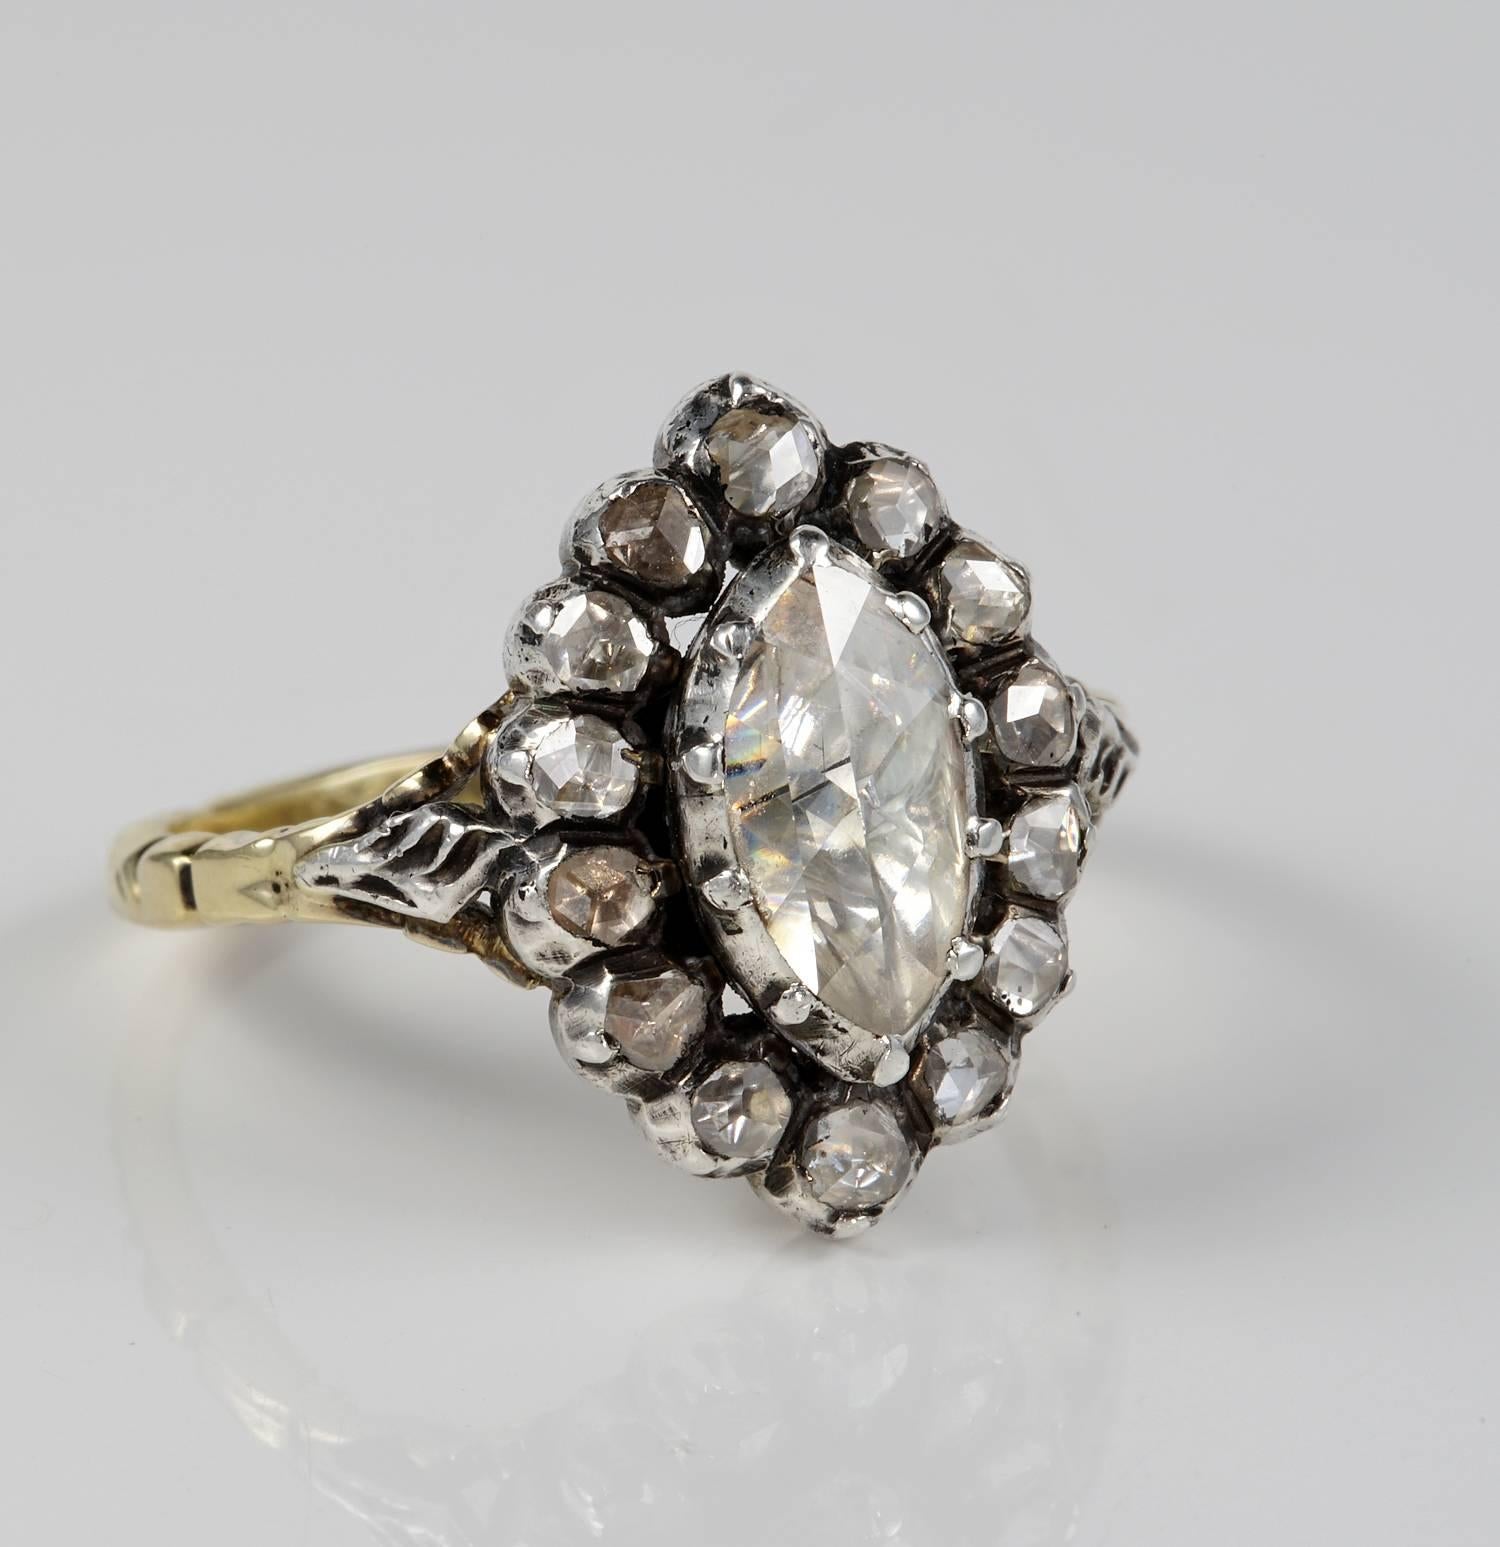 Georgian period in style Diamond cluster ring of rare beauty
Centrally set with Navette Rose cut Diamond of extremely fine, well proportioned cut high grade in either colour than clarity
Spreading as much as 1.10 Carat Diamond, measurements given